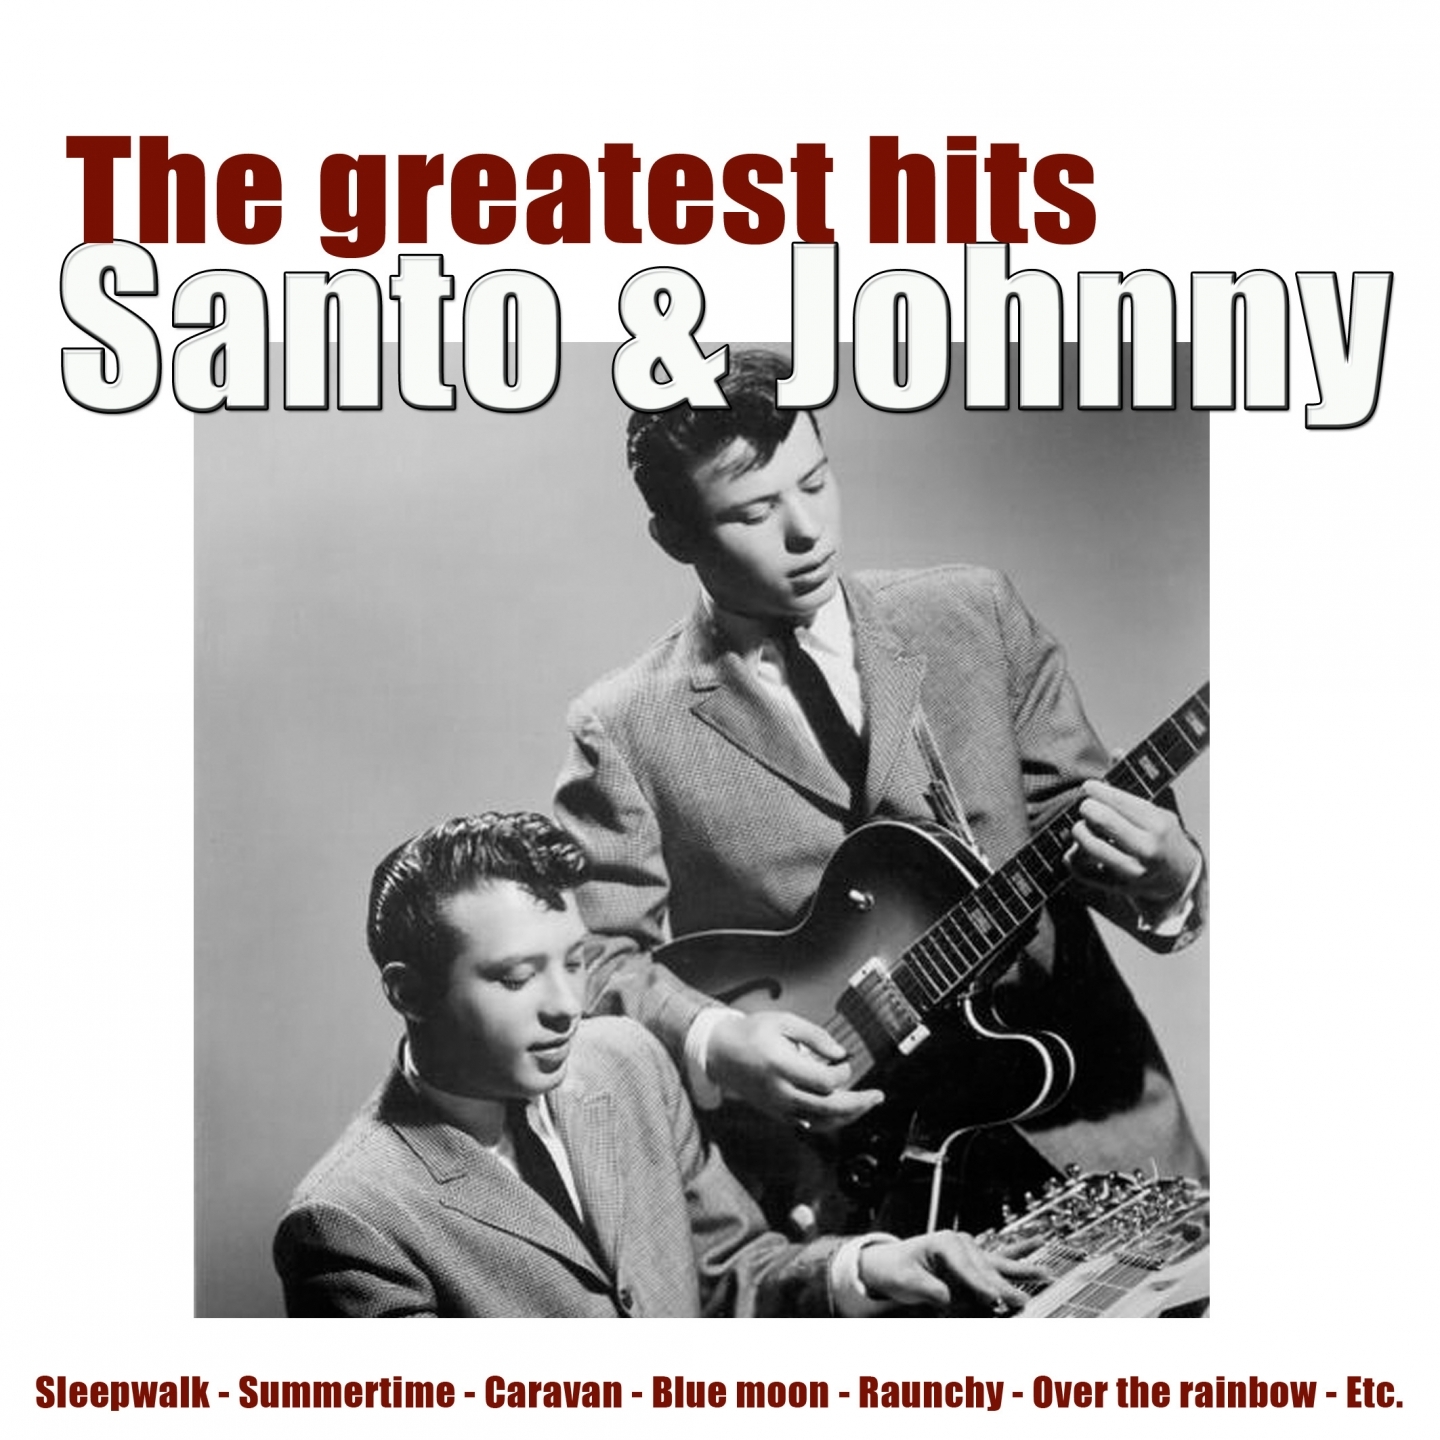 The Greatest Hits of Santo & Johnny